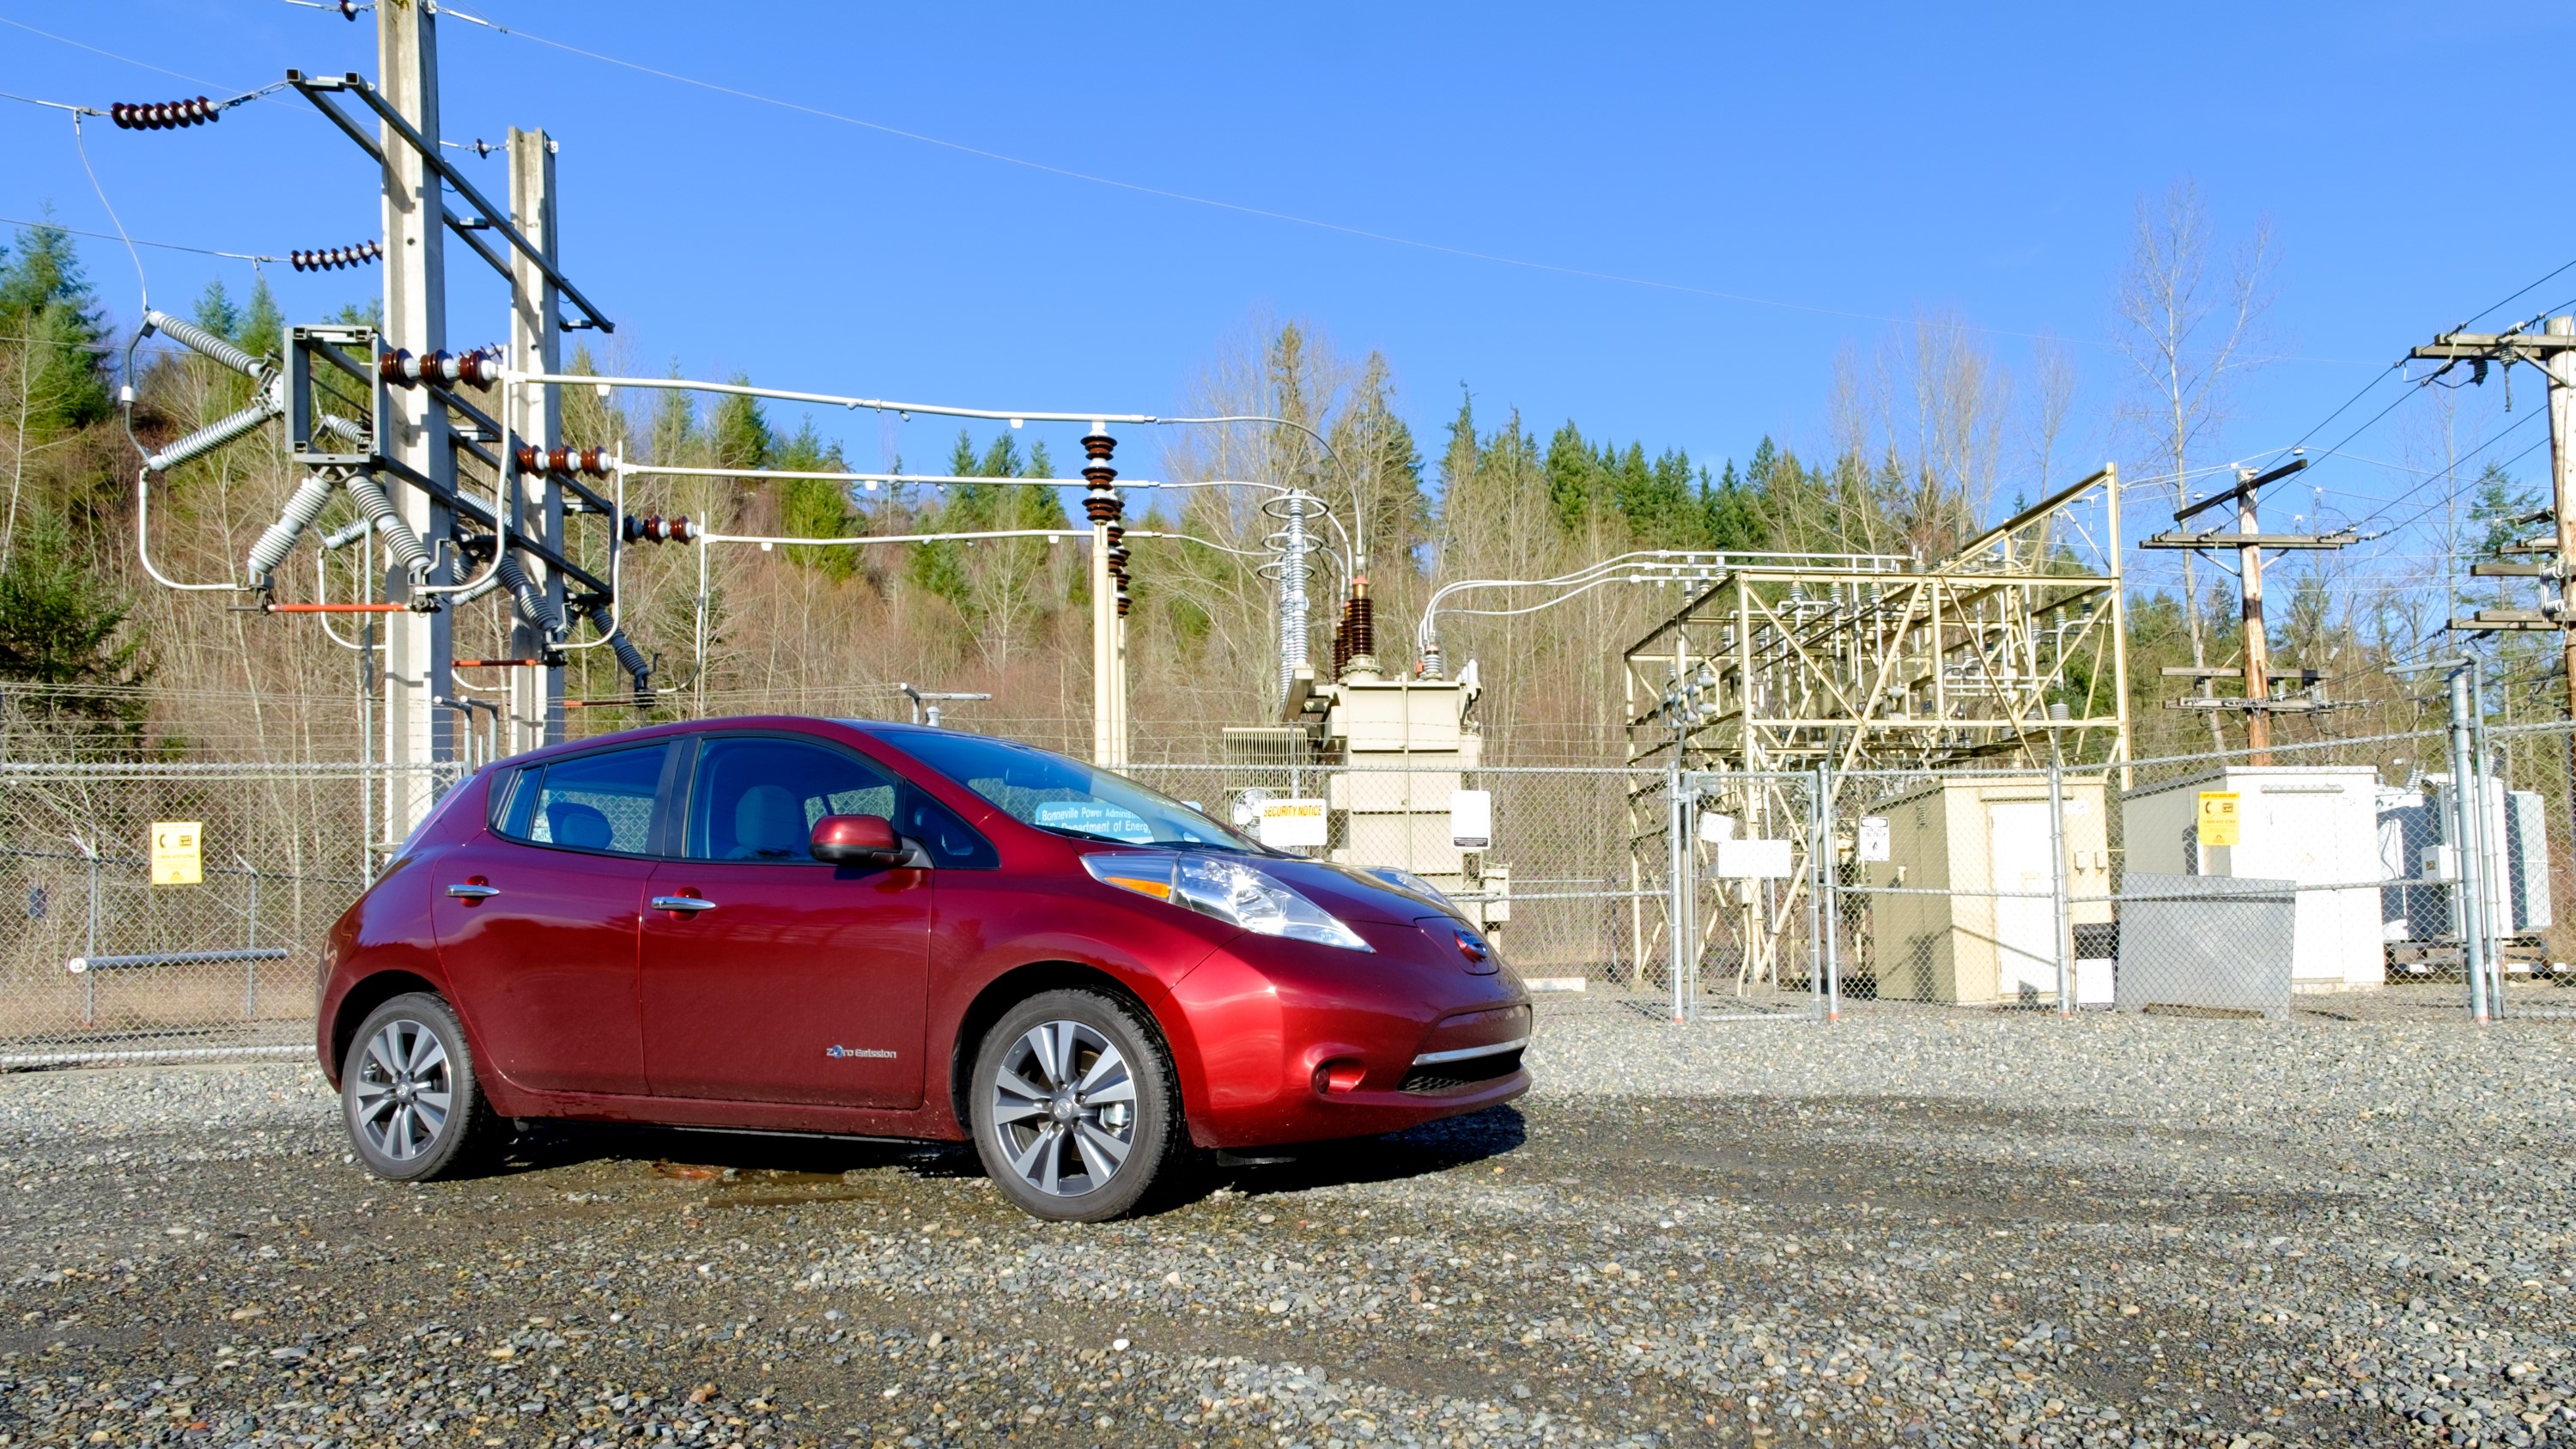 nissan-leaf-s-go-3g-because-at-t-will-kill-2g-this-year-techradar